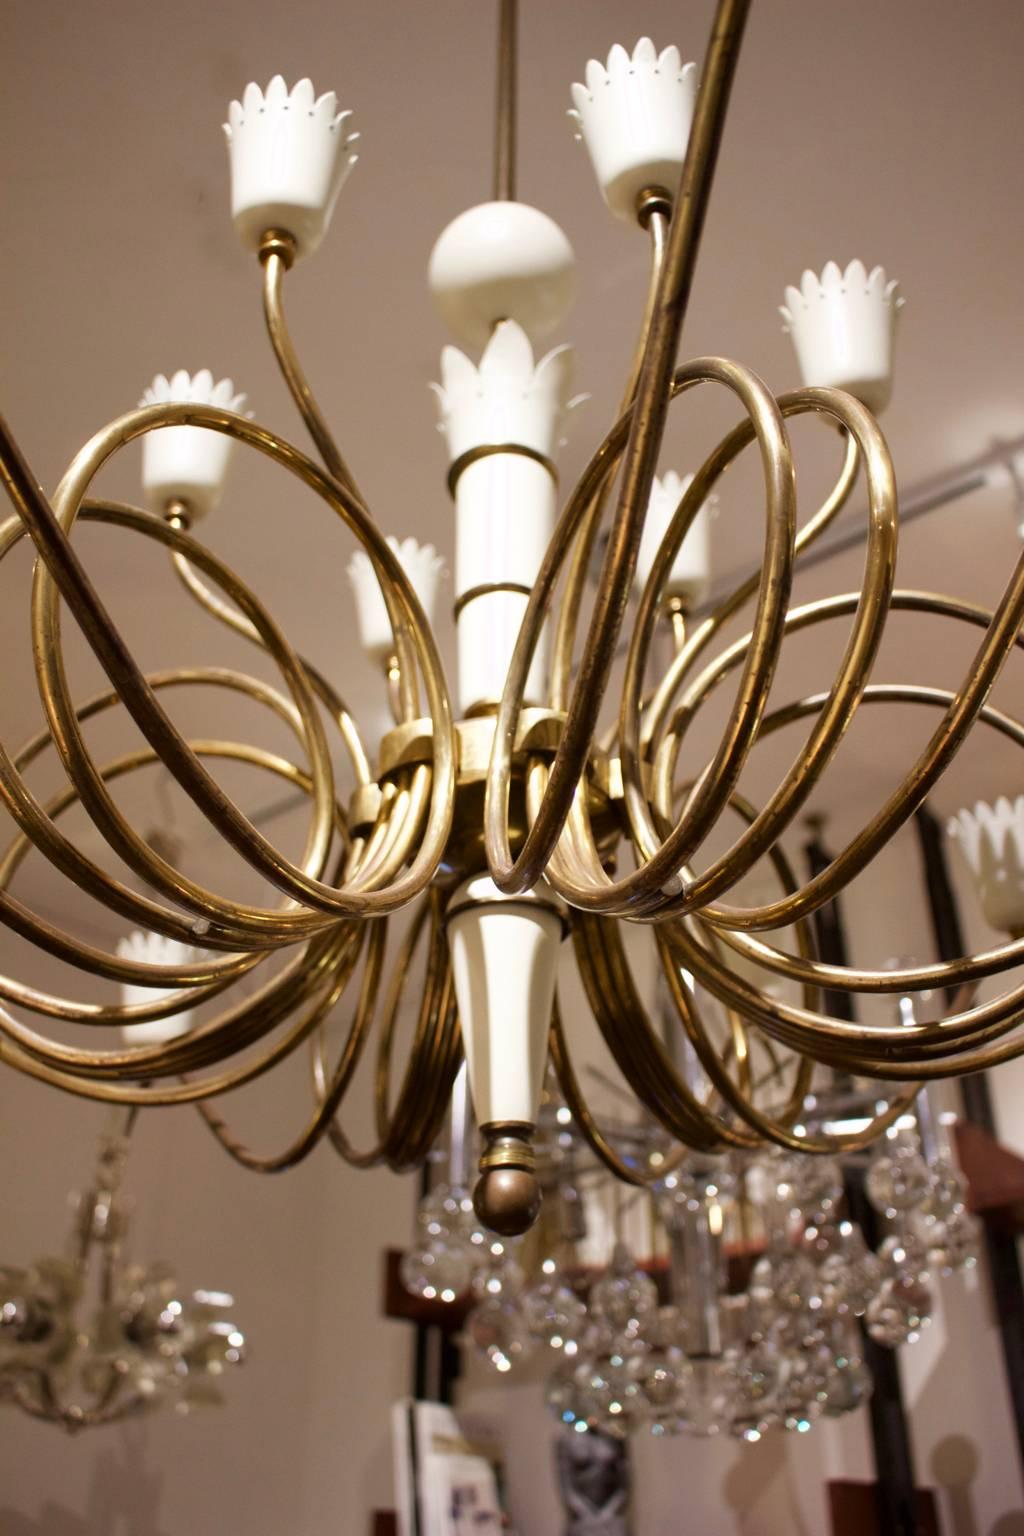 Large chandelier of brass with painted details. Italian mid-20th century, probably early 1950s.

The chandelier comprises six sections, each with three curved and looped arms ending in crown-shaped cones, painted in off-white, giving 18 lights in